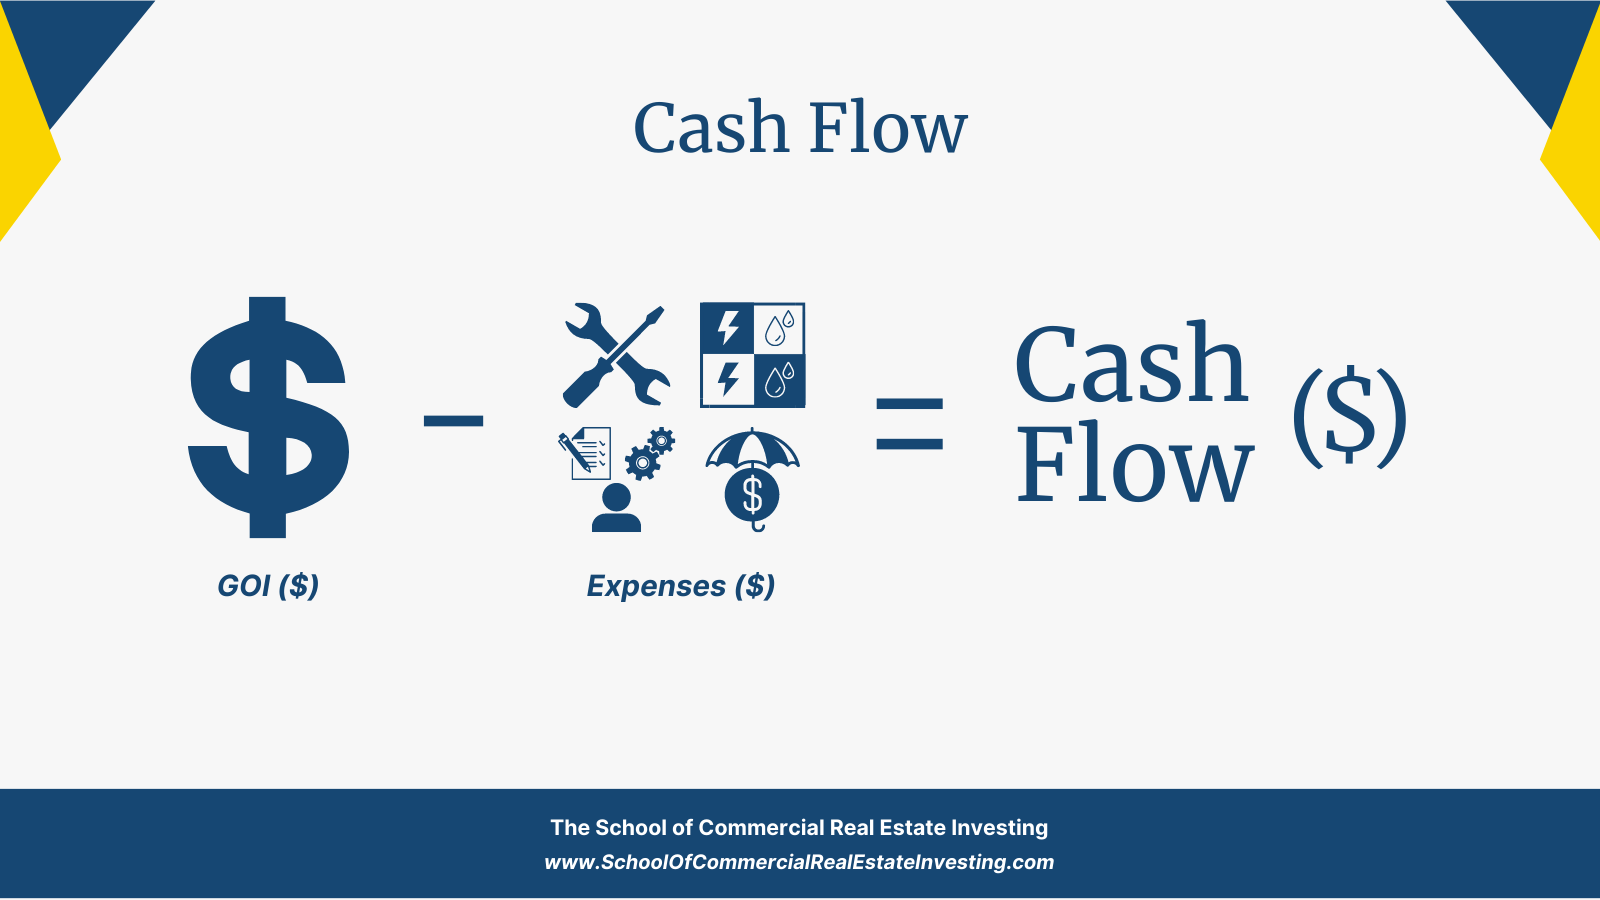 Calculate Cash Flow by subtracting all expenses from the gross operating income.